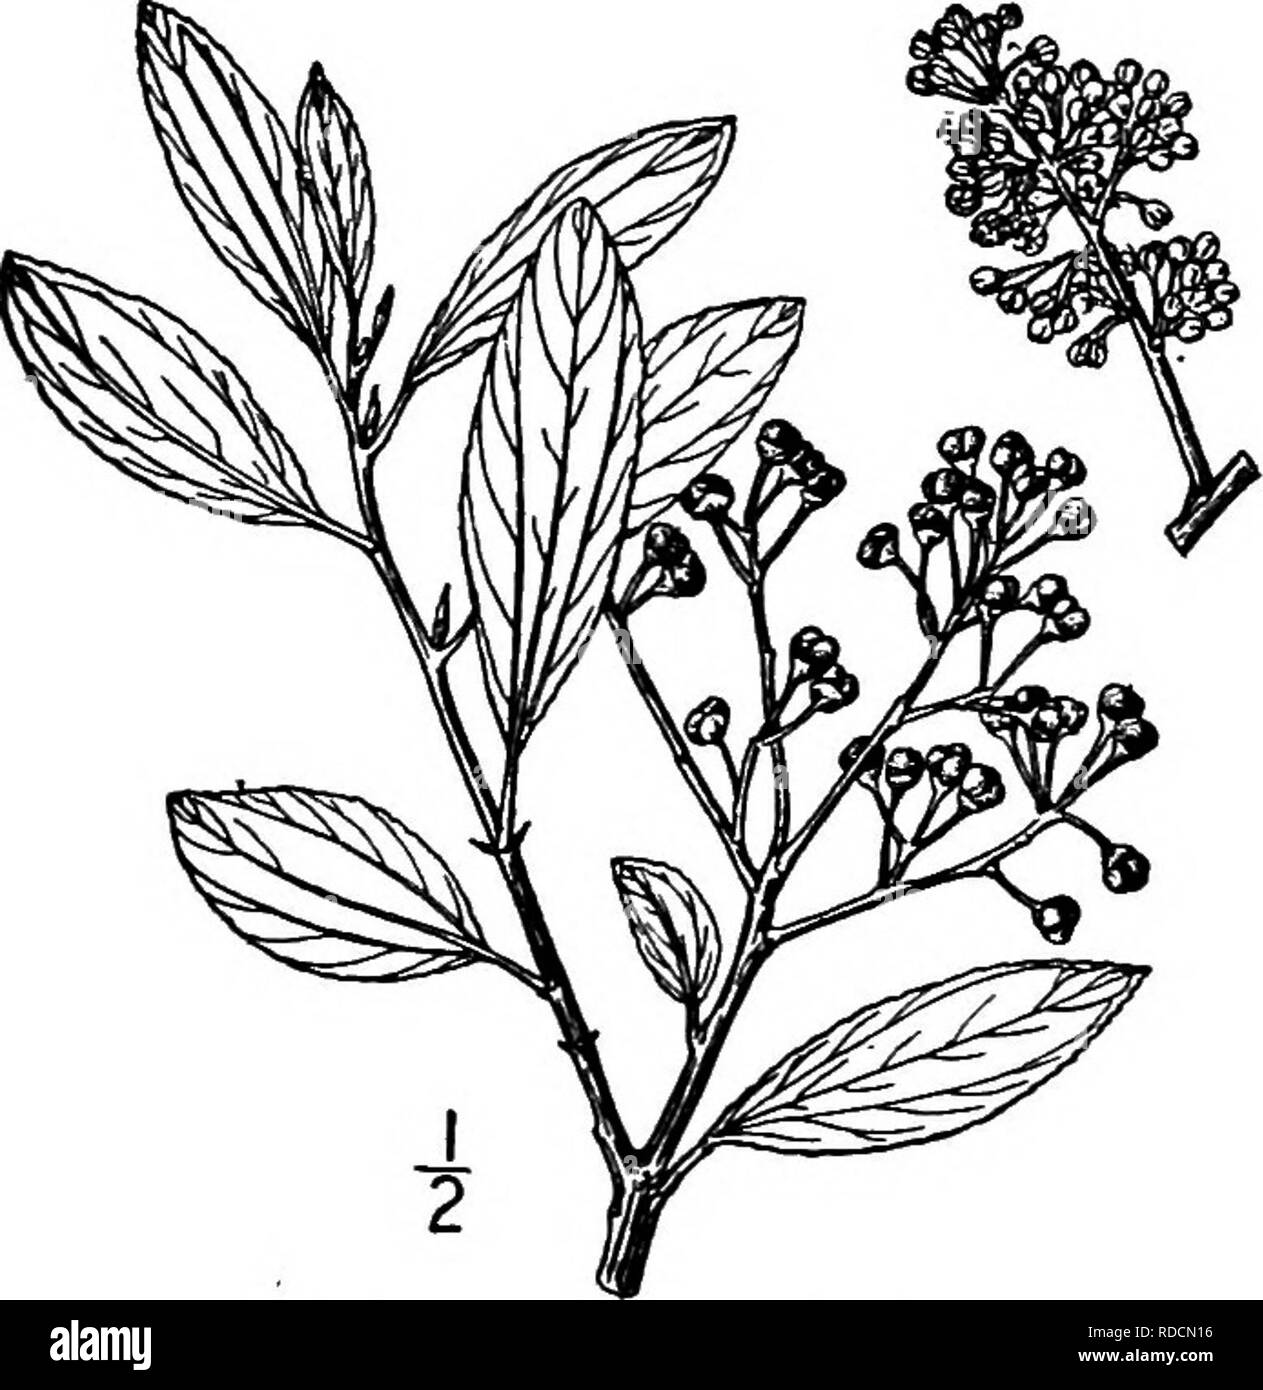 . North American trees : being descriptions and illustrations of the trees growing independently of cultivation in North America, north of Mexico and the West Indies . Trees. 68o California Lilacs and gardens. Califomian local names are Blue myrtle, Blue blossom, Wild lilac, and Tick tree. The thin red-brown bark is finely scaly. The yoimg twigs are strongly ridged and angled, finely hairy, yellow- ish green, becoming smooth, round and brown. The leaves vary from oblong to ovate, and from 2 to 5 cm. in length; they are blunt or blimtish at the apex, nar- rowed or sometimes rounded at the base, Stock Photo